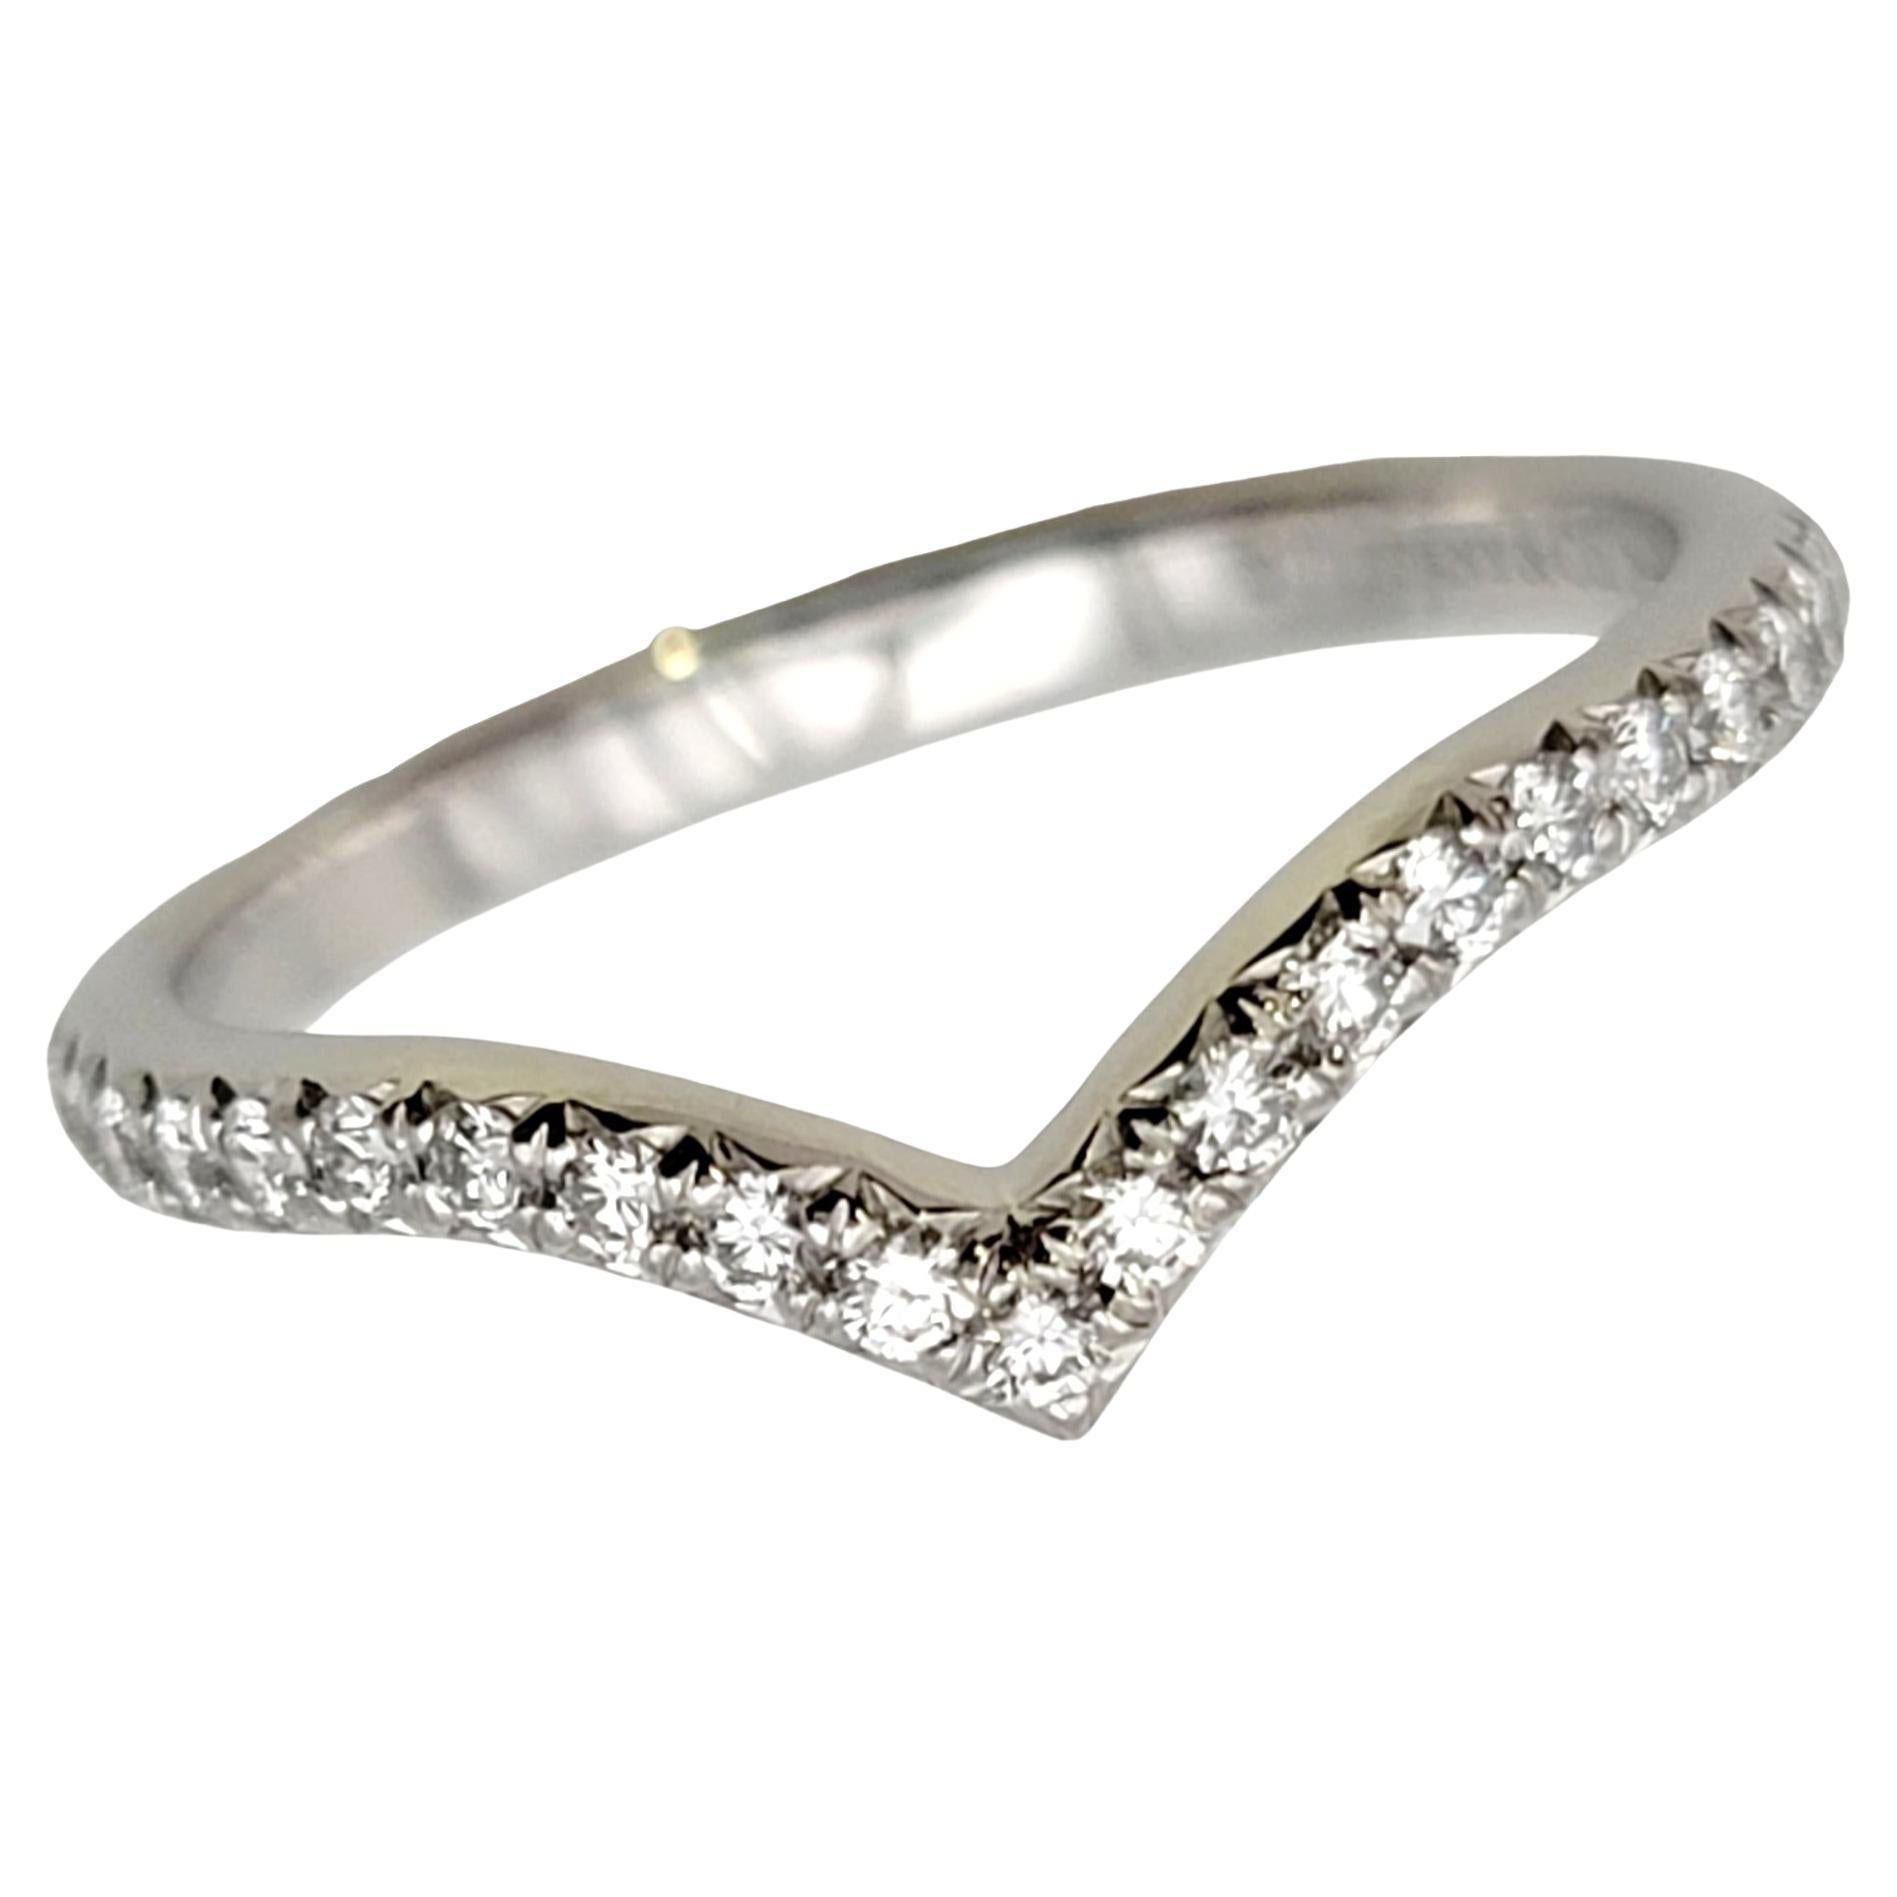 Ring size: 5.75

Gorgeous Tiffany & Co. 'Soleste' diamond 'V' band ring.  Founded in 1837 in New York City, Tiffany & Co. is one of the world's most storied luxury design houses recognized globally for its innovative jewelry design, extraordinary